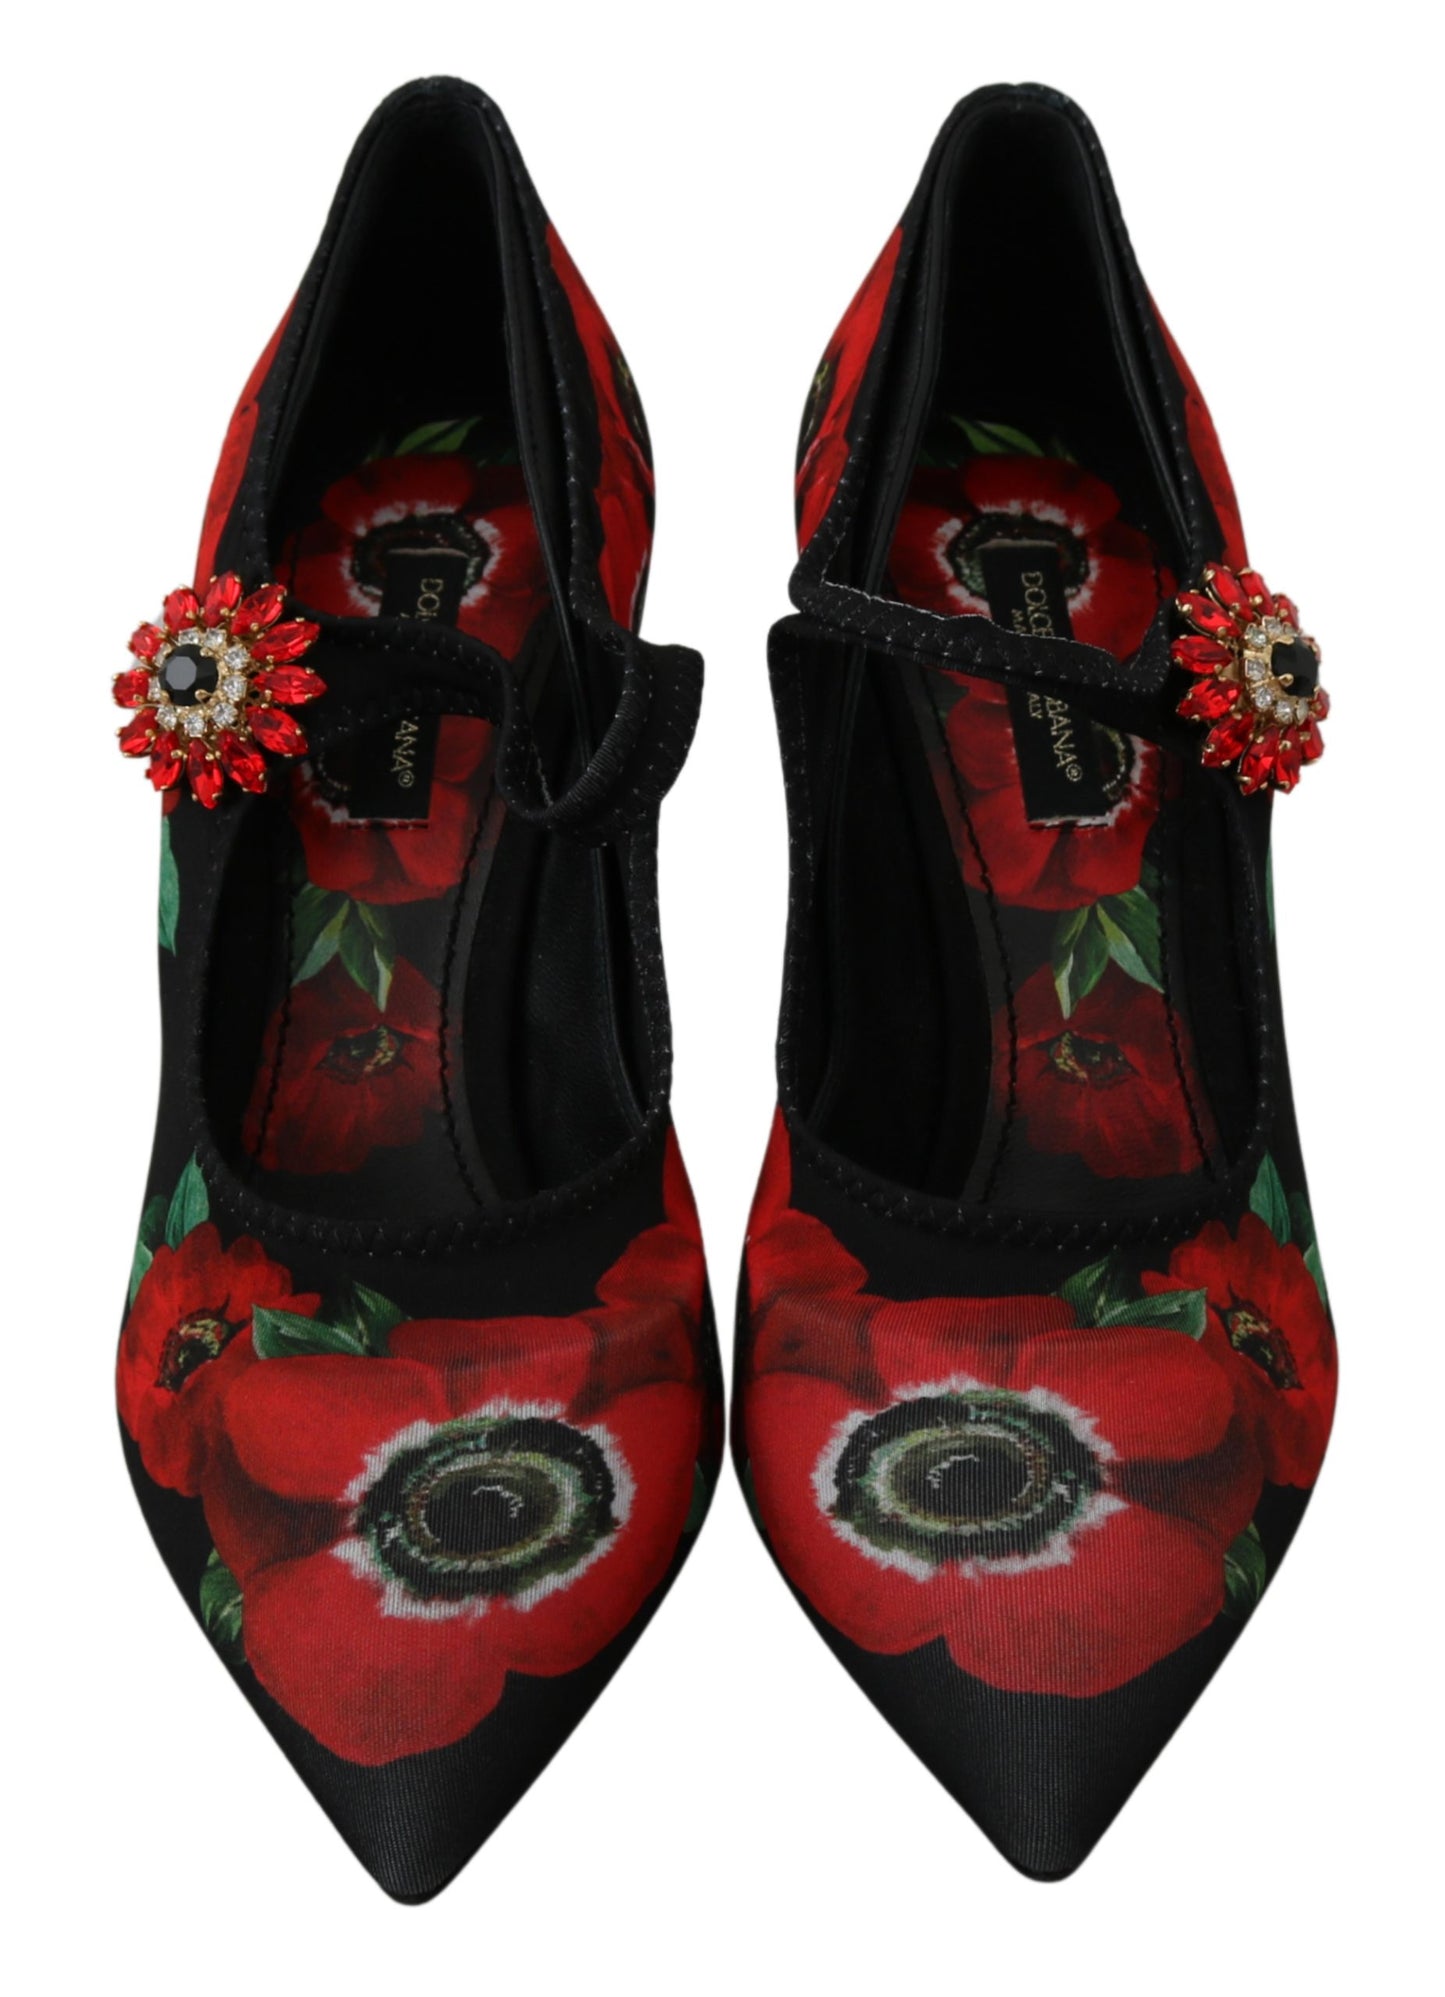 Black Red Floral Mary Janes Pumps Shoes